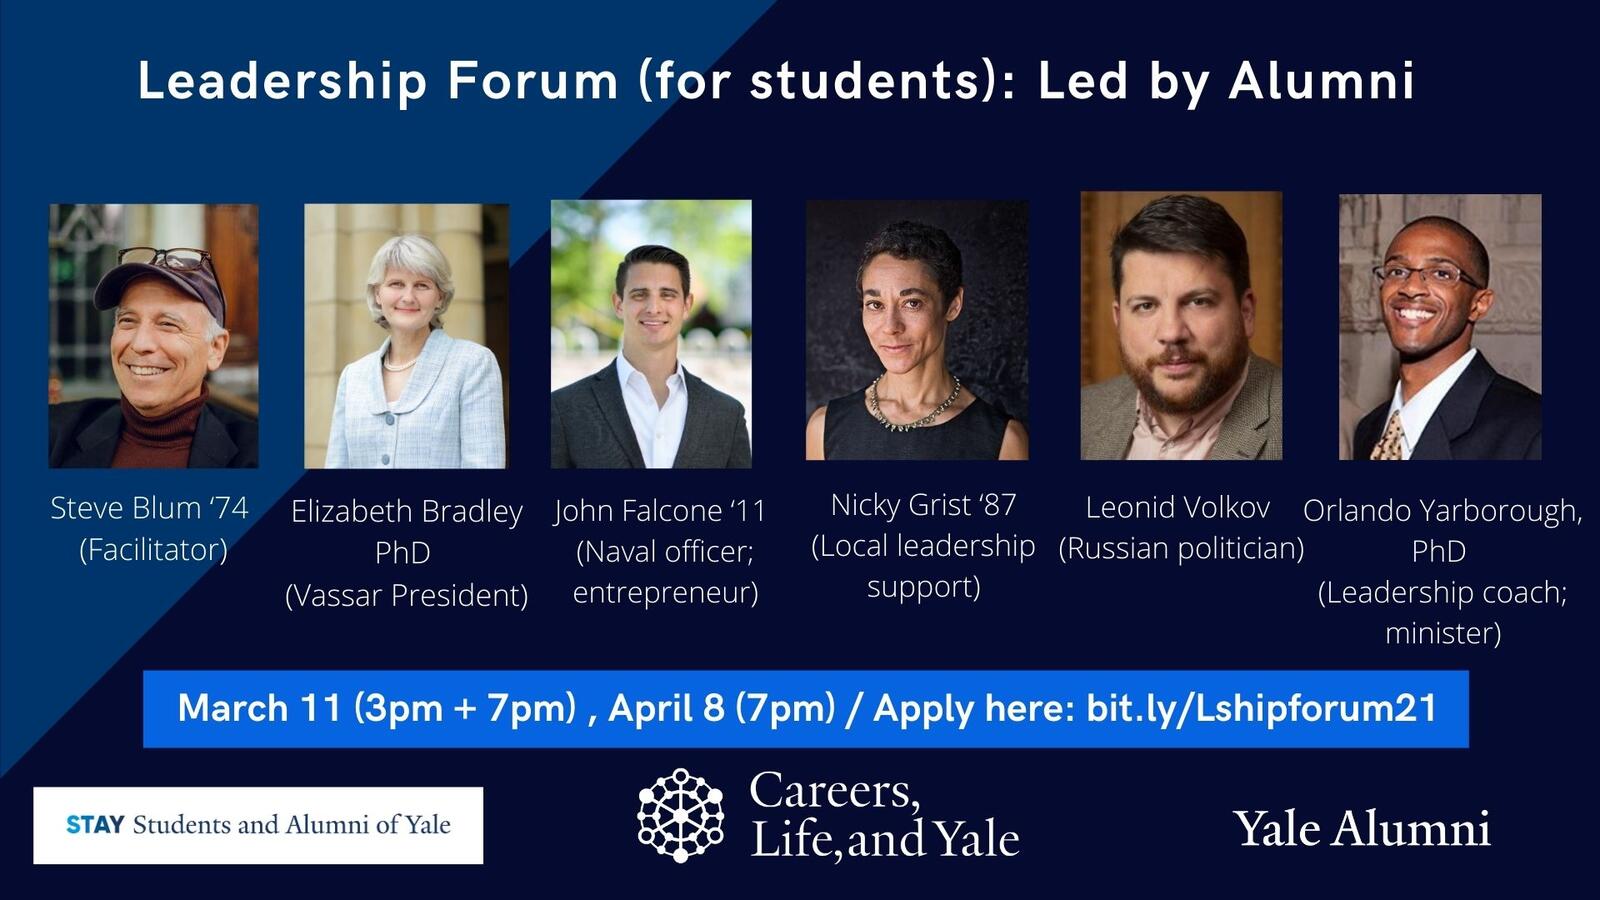 Careers, Life, and Yale Leadership Forum For Students: Led By Alumni